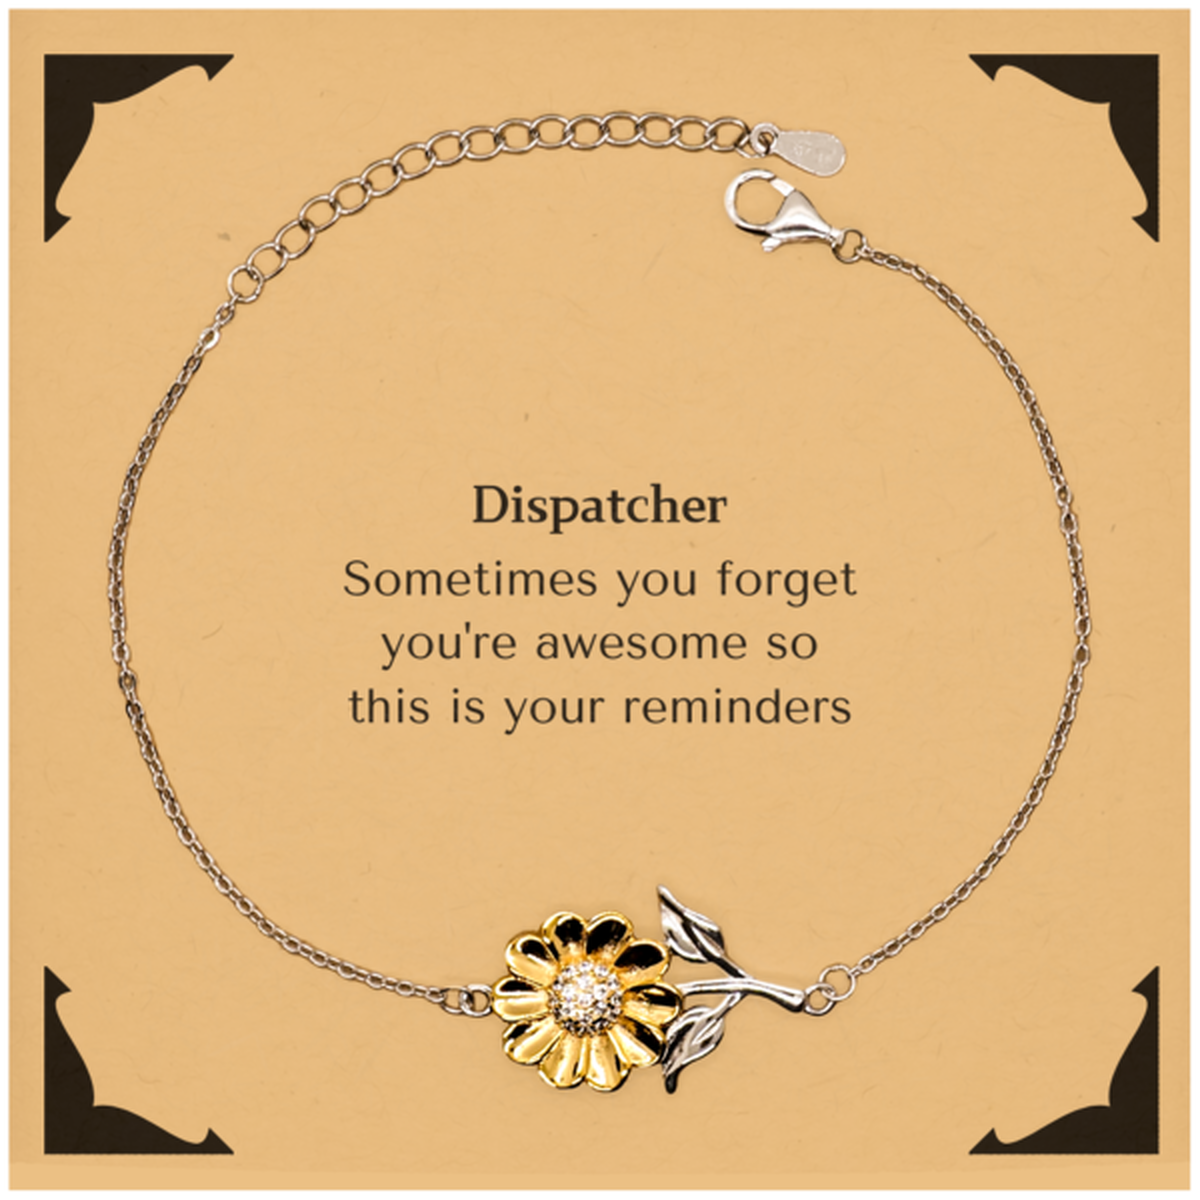 Sentimental Dispatcher Sunflower Bracelet, Dispatcher Sometimes you forget you're awesome so this is your reminders, Graduation Christmas Birthday Gifts for Dispatcher, Men, Women, Coworkers